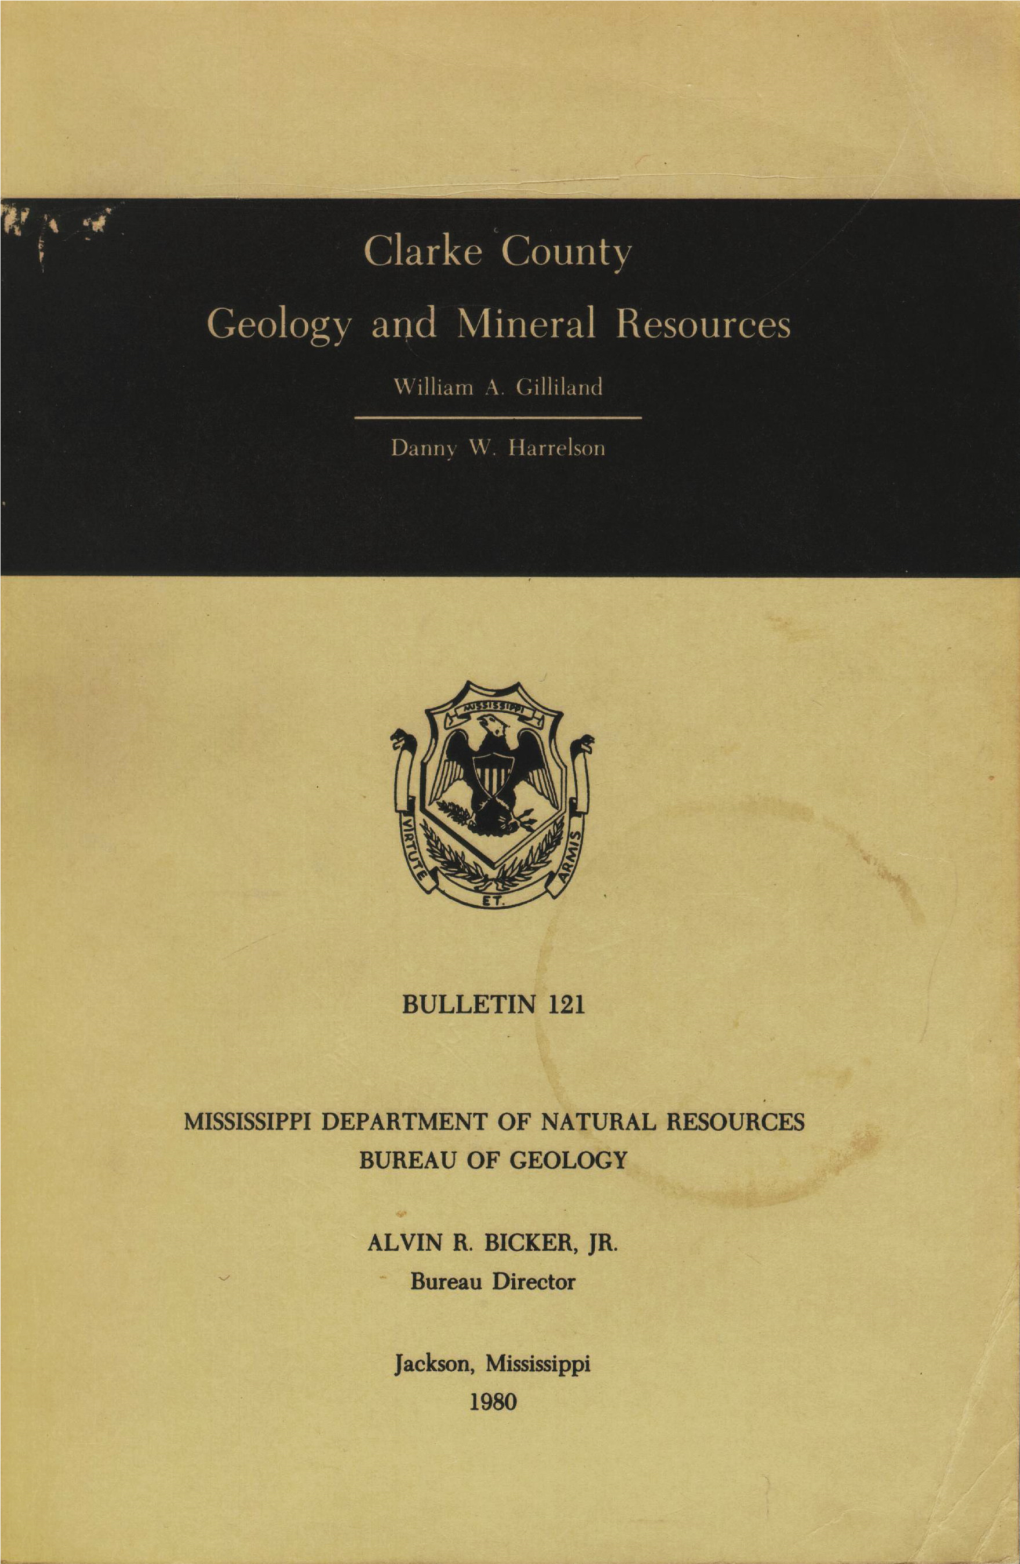 Clarke County Geology and Mineral Resources